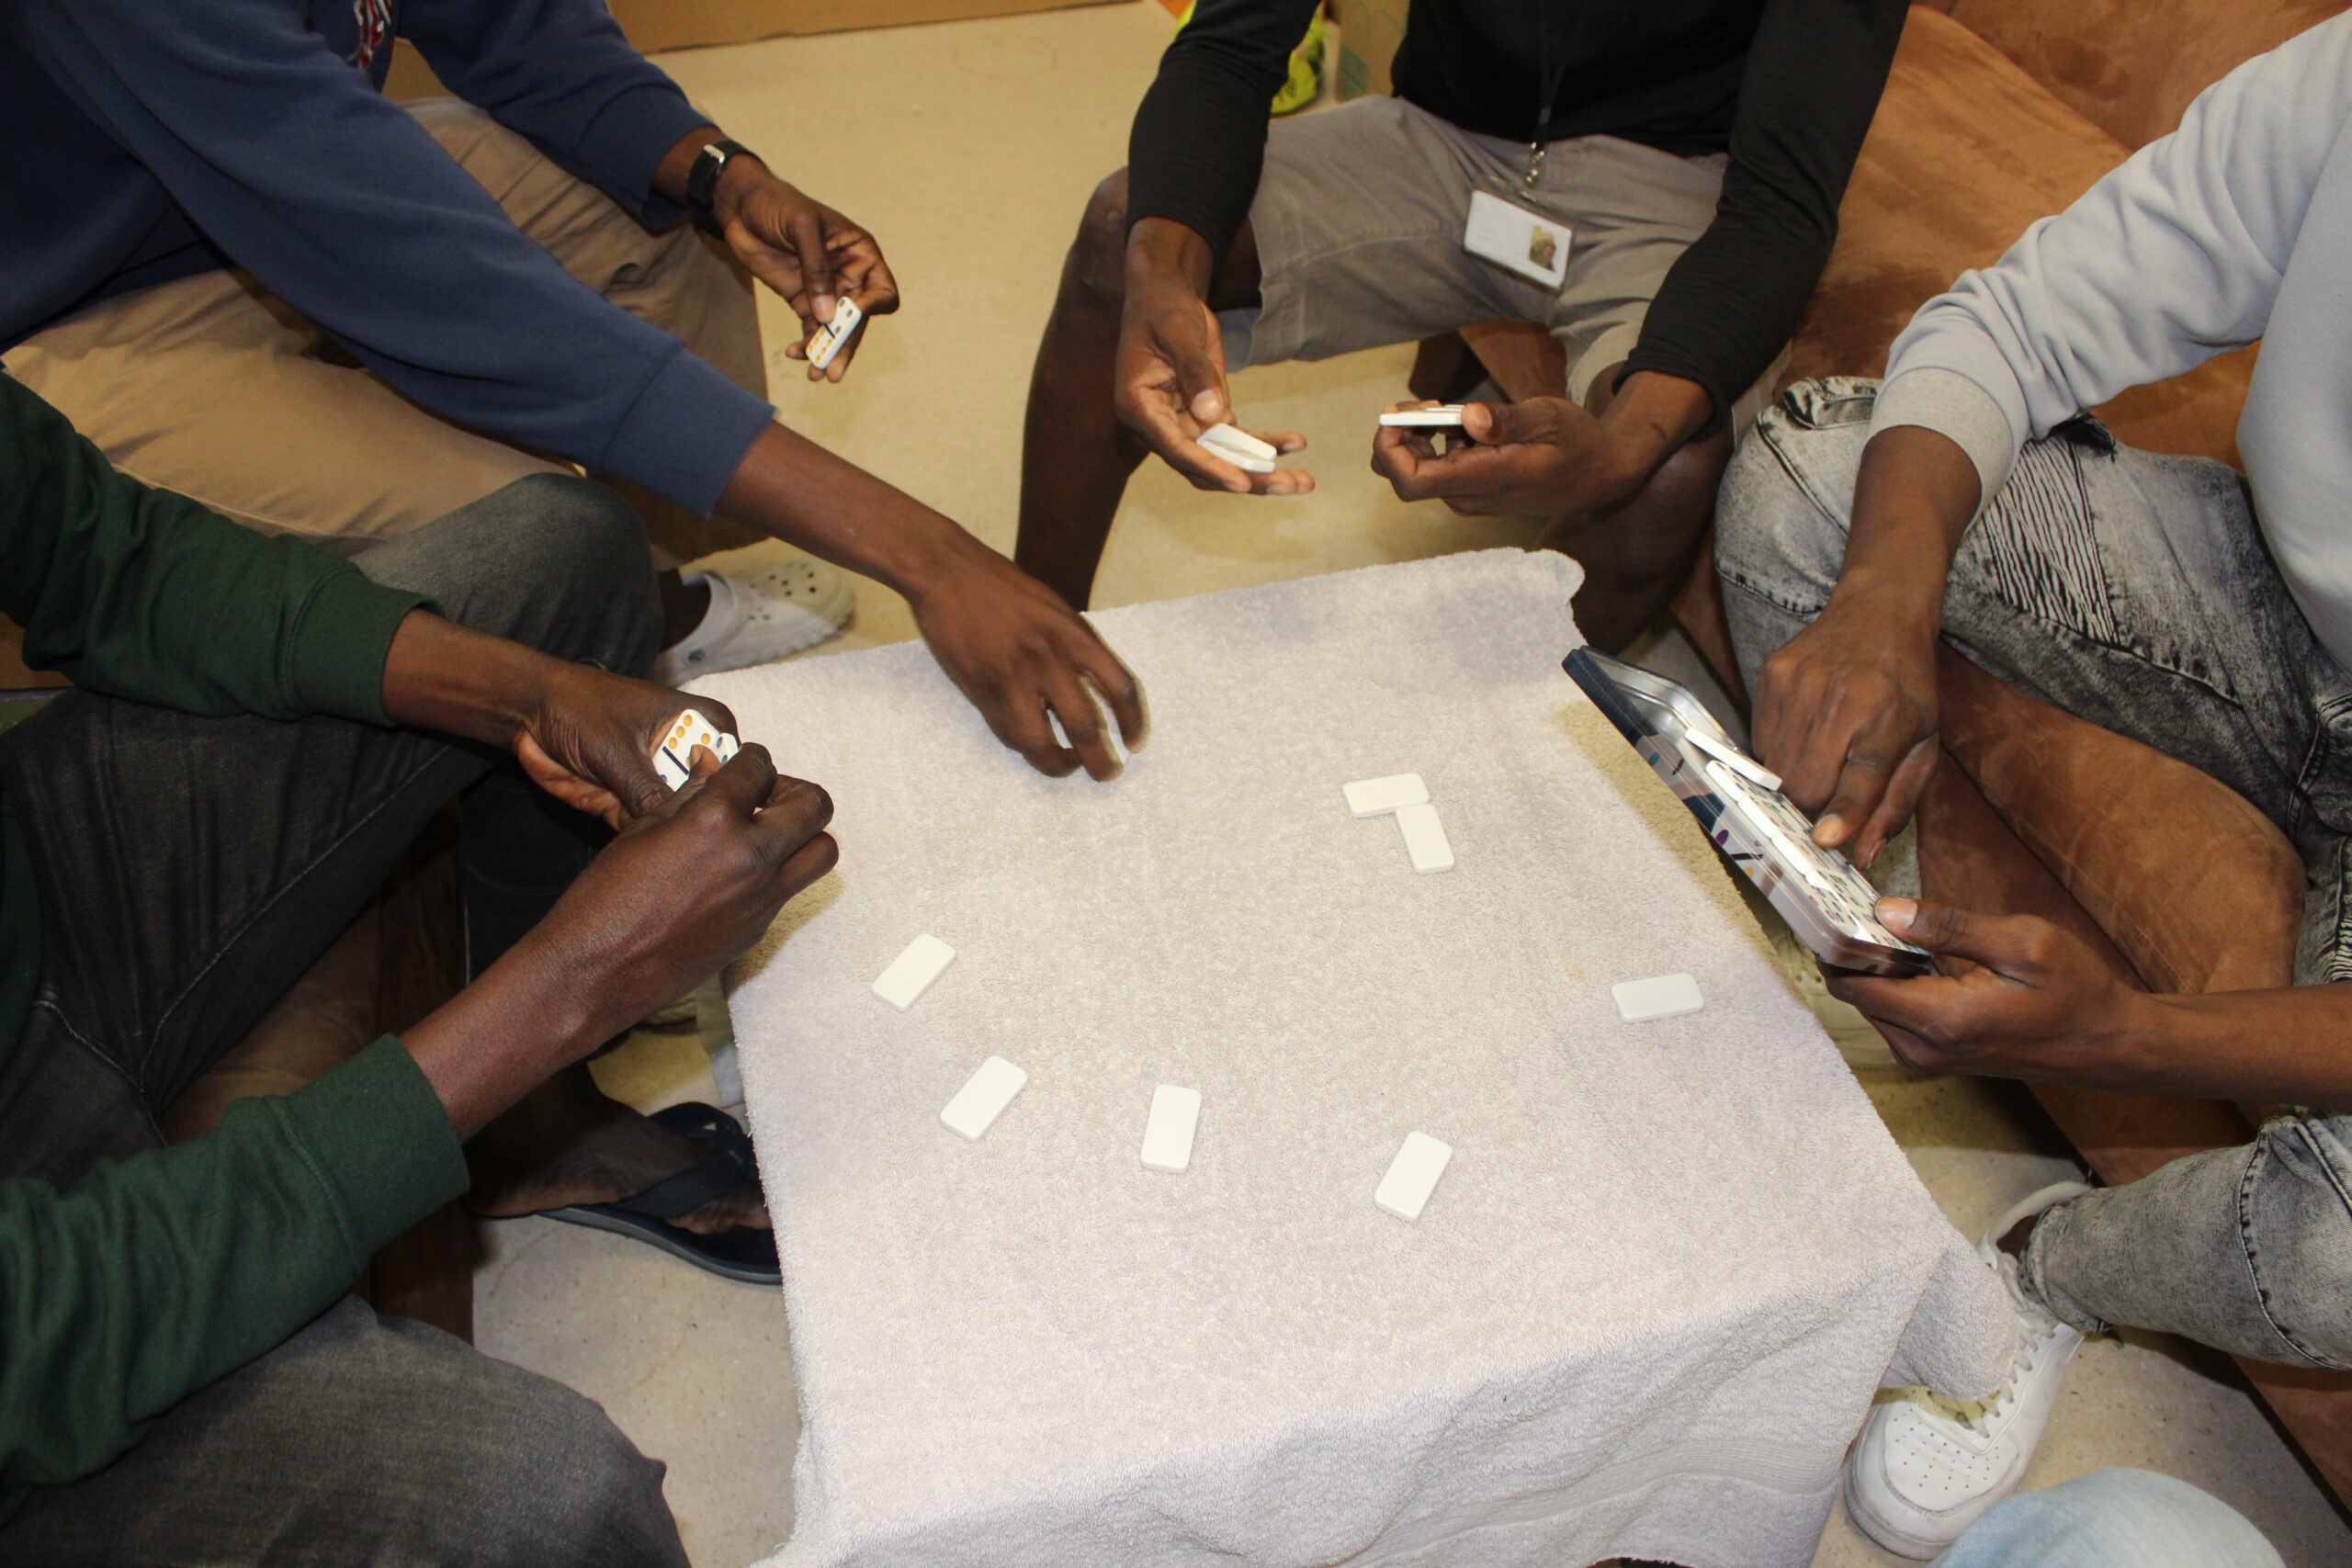 A group of men playing dominoes